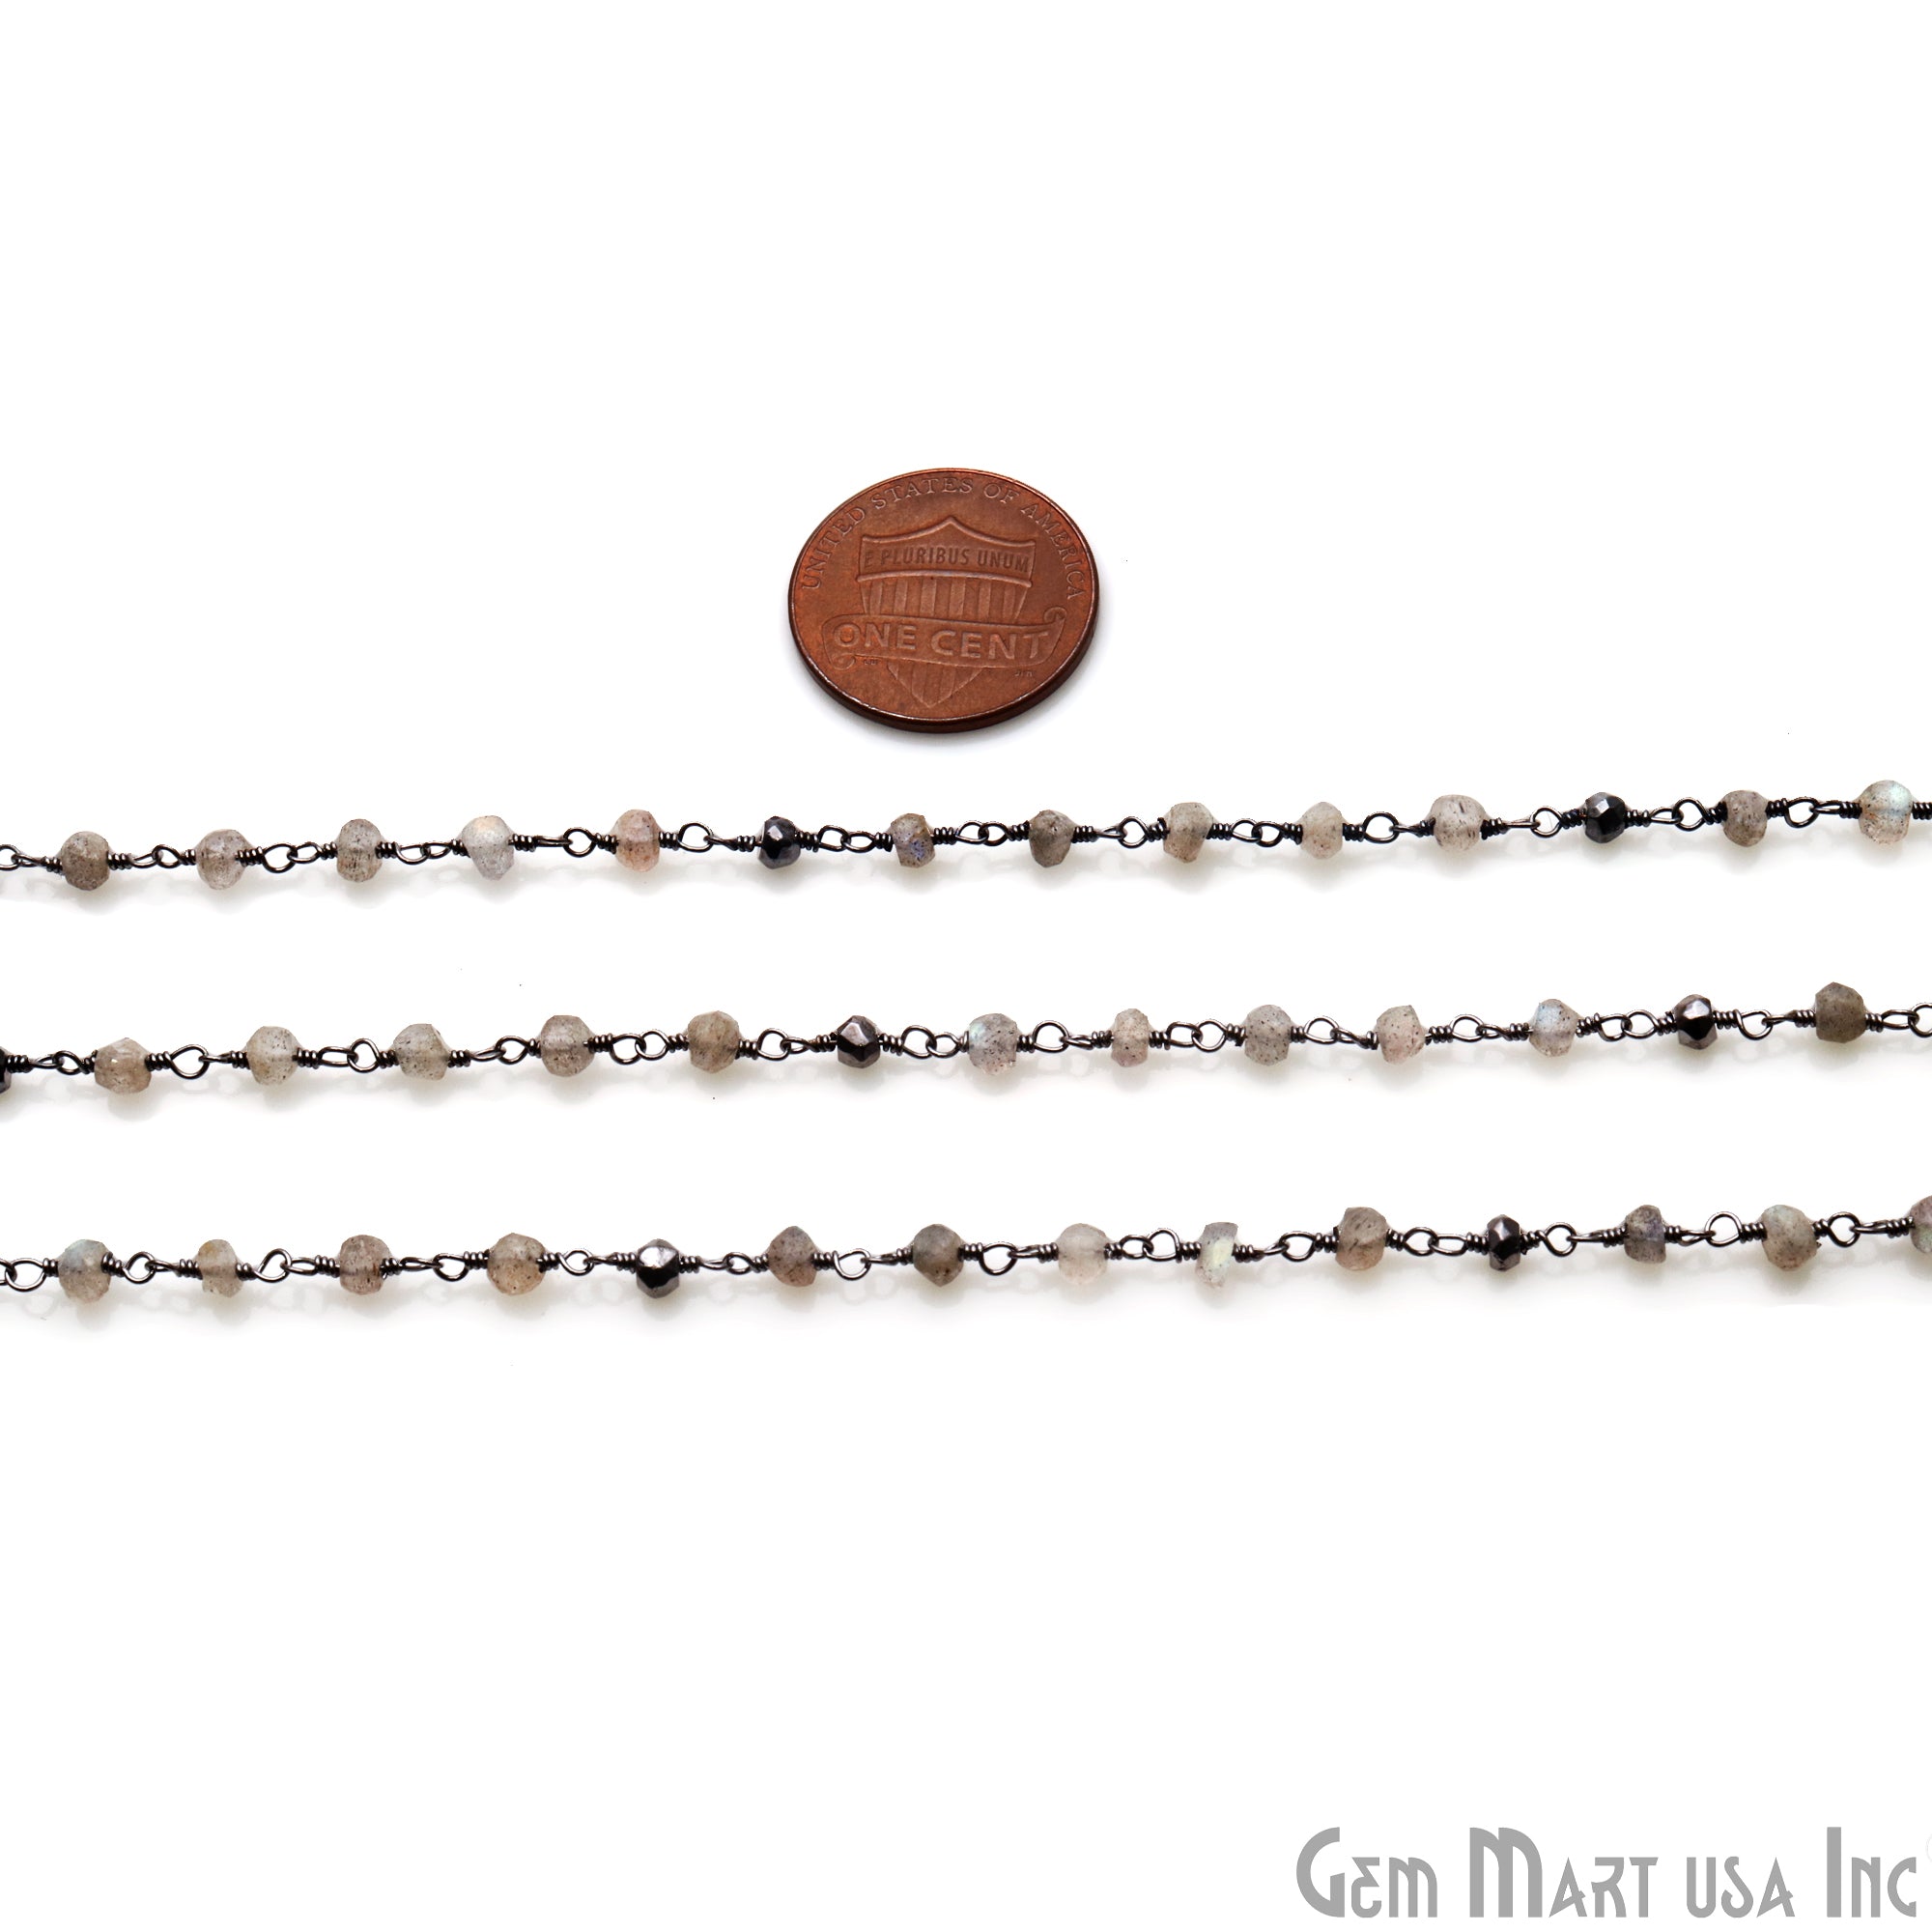 Pyrite With Labradorite 3-3.5mm Oxidized Wire Wrapped Rosary Chain - GemMartUSA